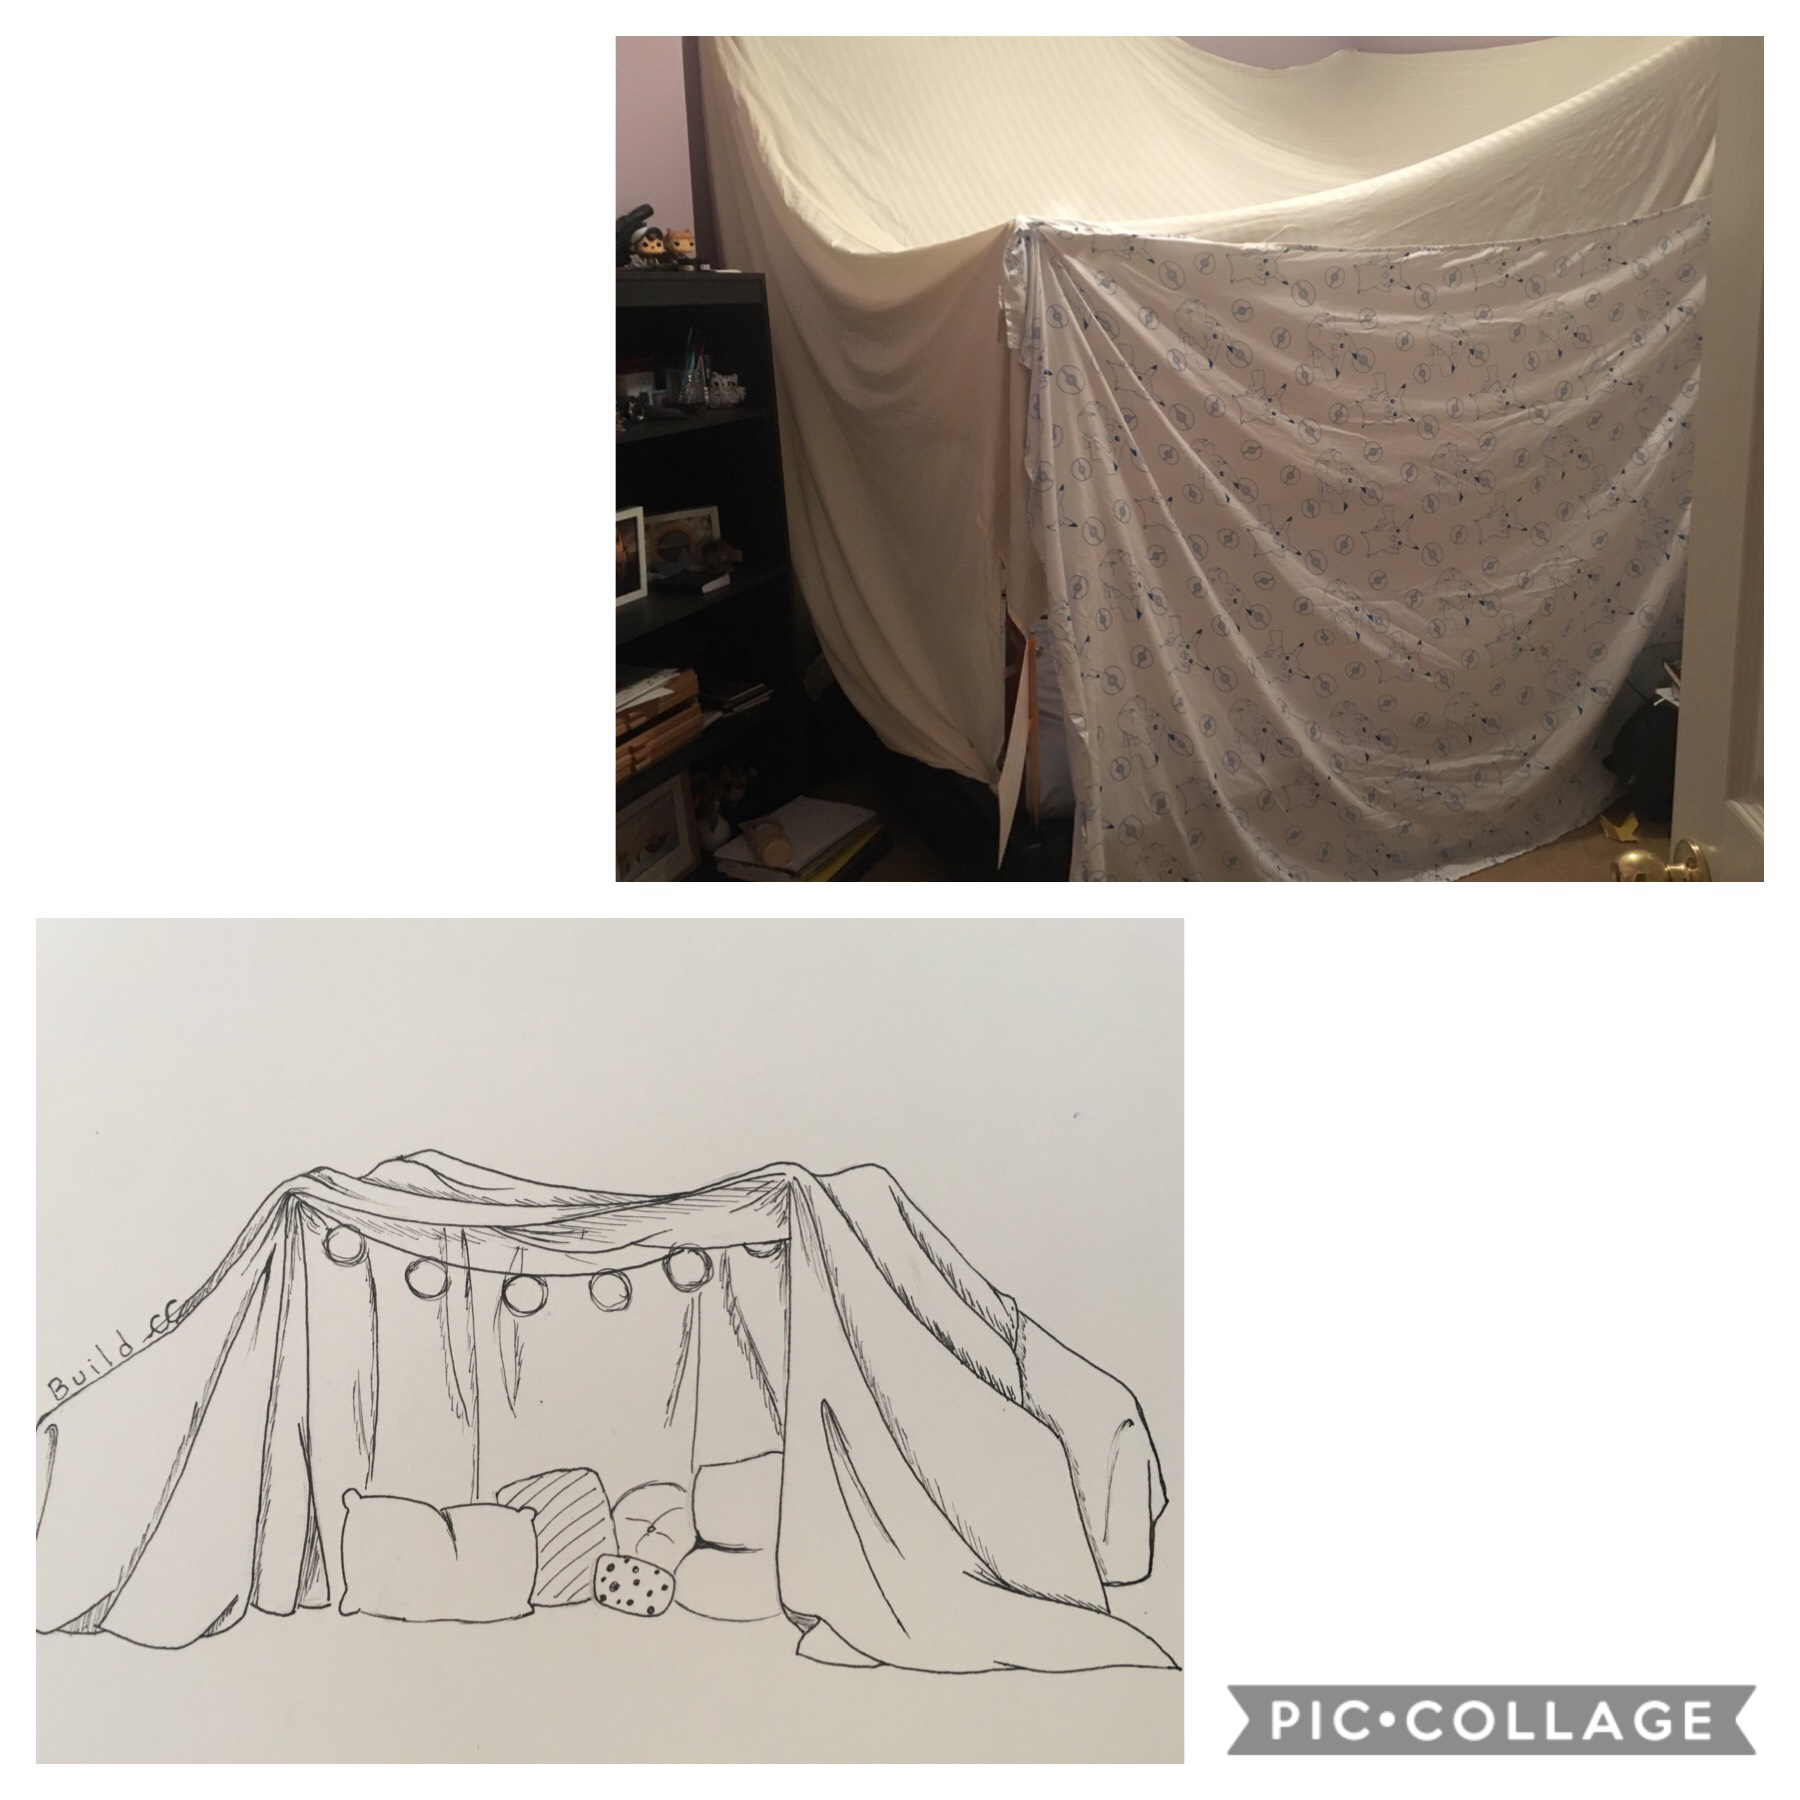 Inktober Day 5 - Build 

I chose to draw a blanket fort because I just recently made my own 🙃